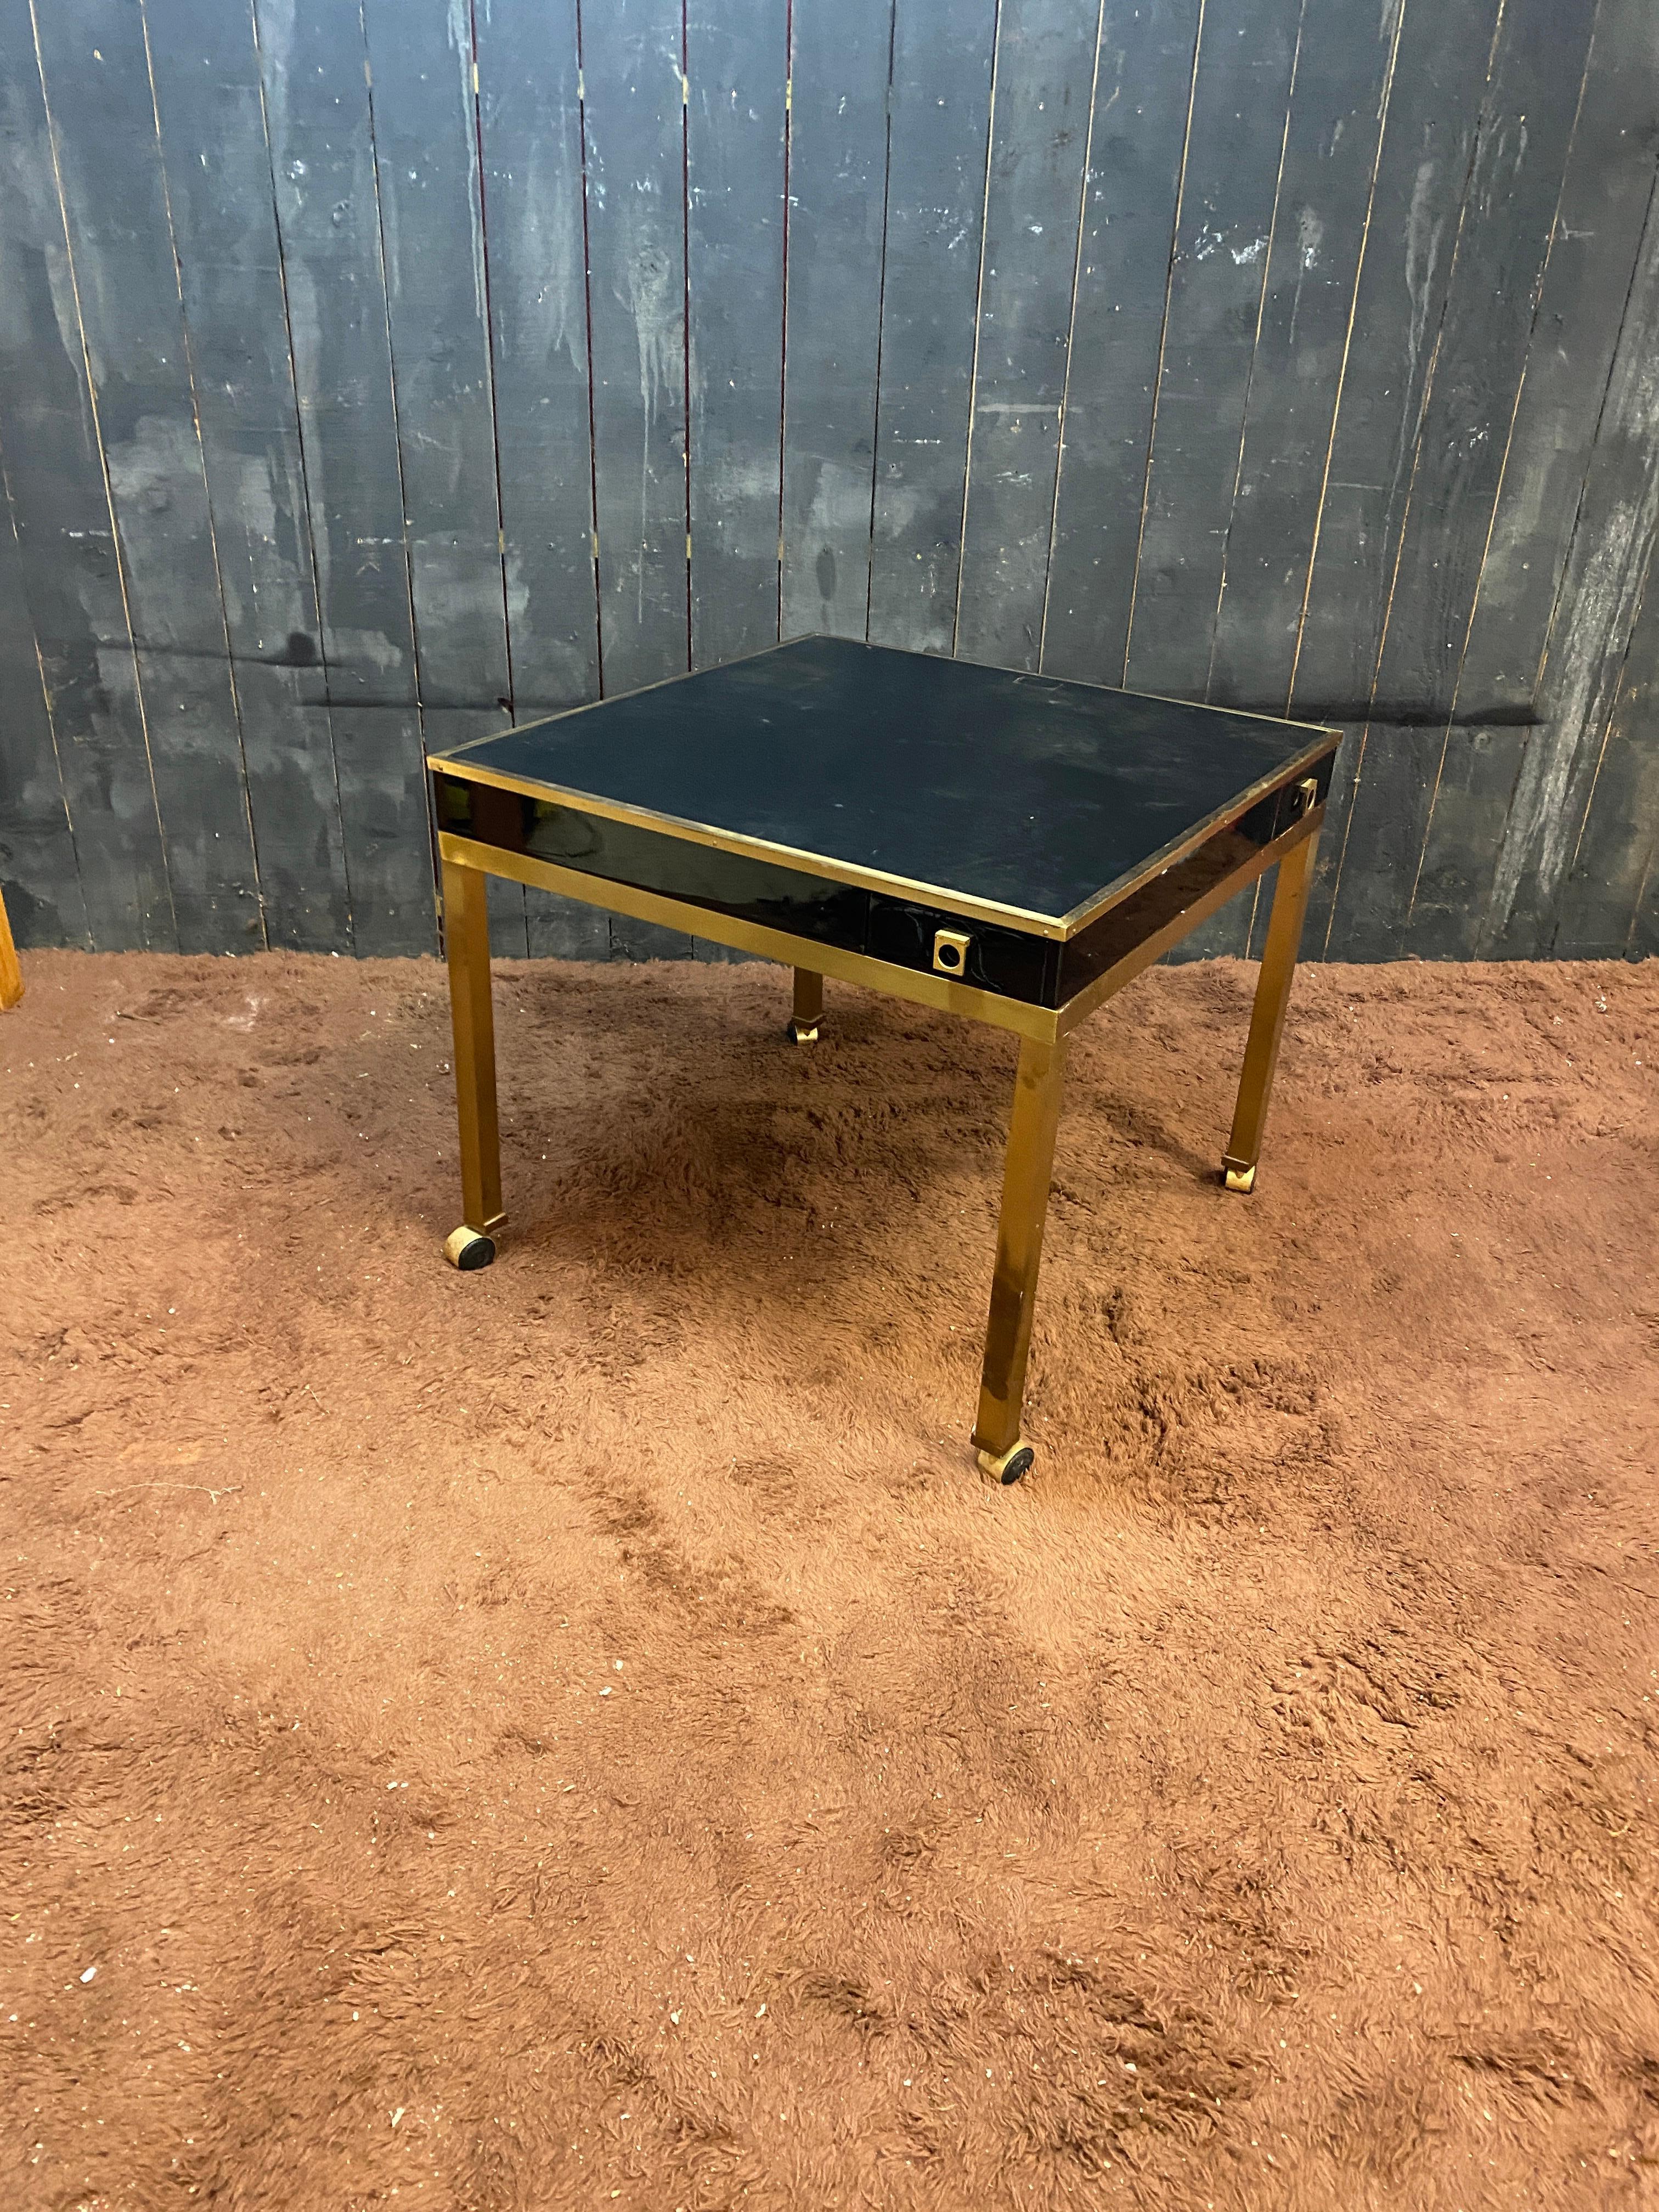 Guy LEFEVRE, game table in brass, lacquered wood and imitation leather
casters
with 4 small drawers allowing, among other things, to place your glass